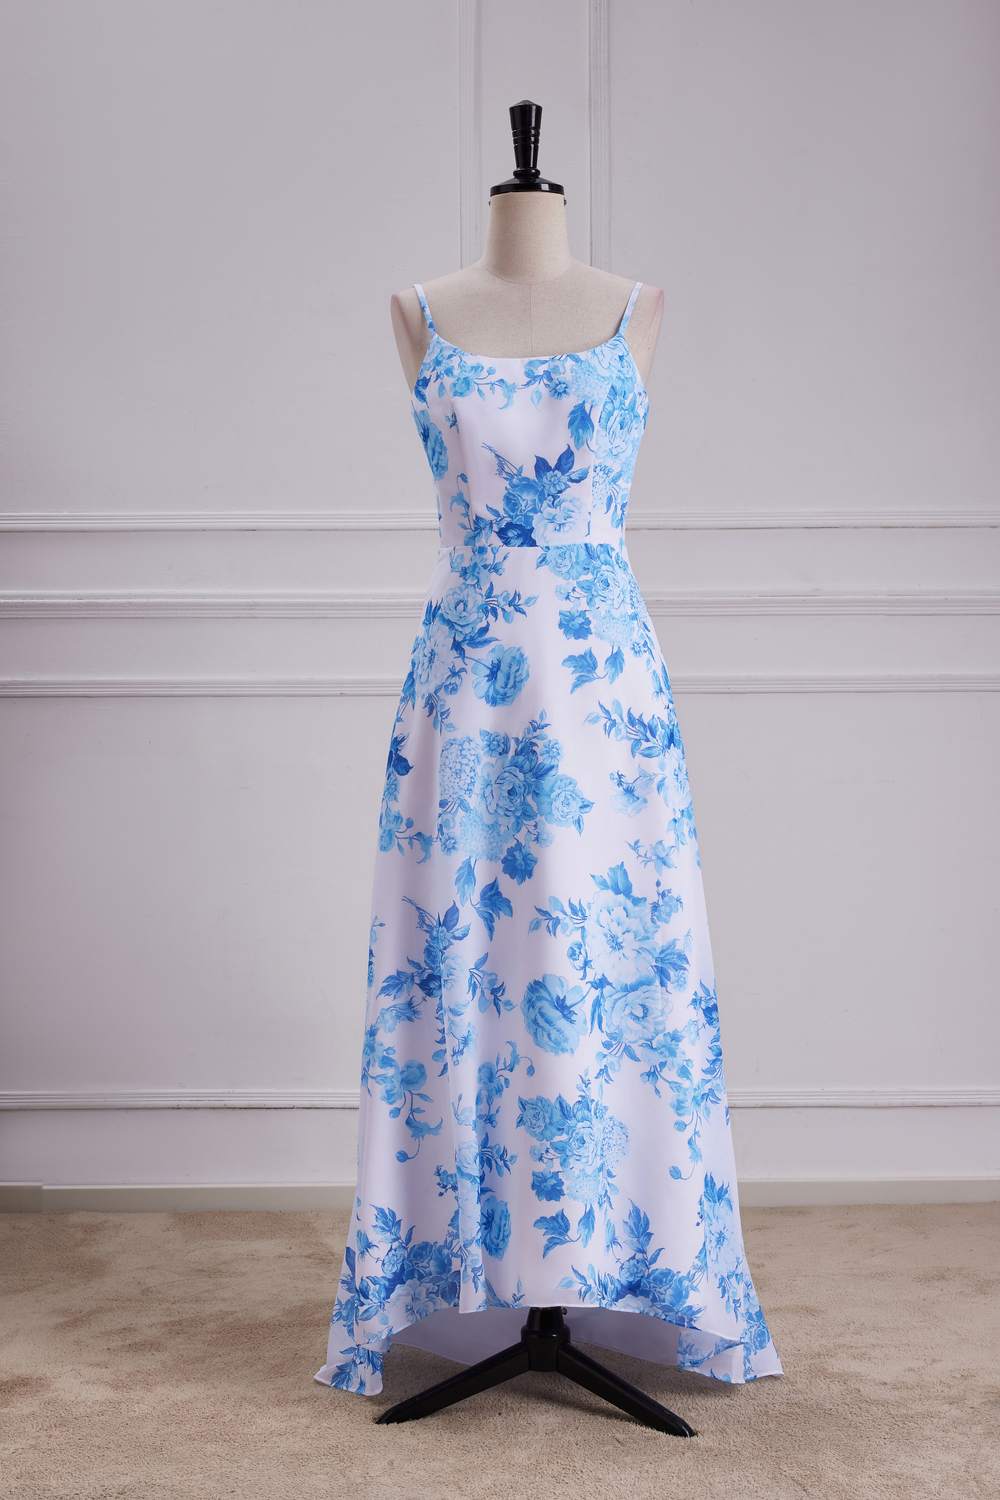 Blue Floral Spaghetti Straps A-line Long Bridesmaid Dress full shot front side